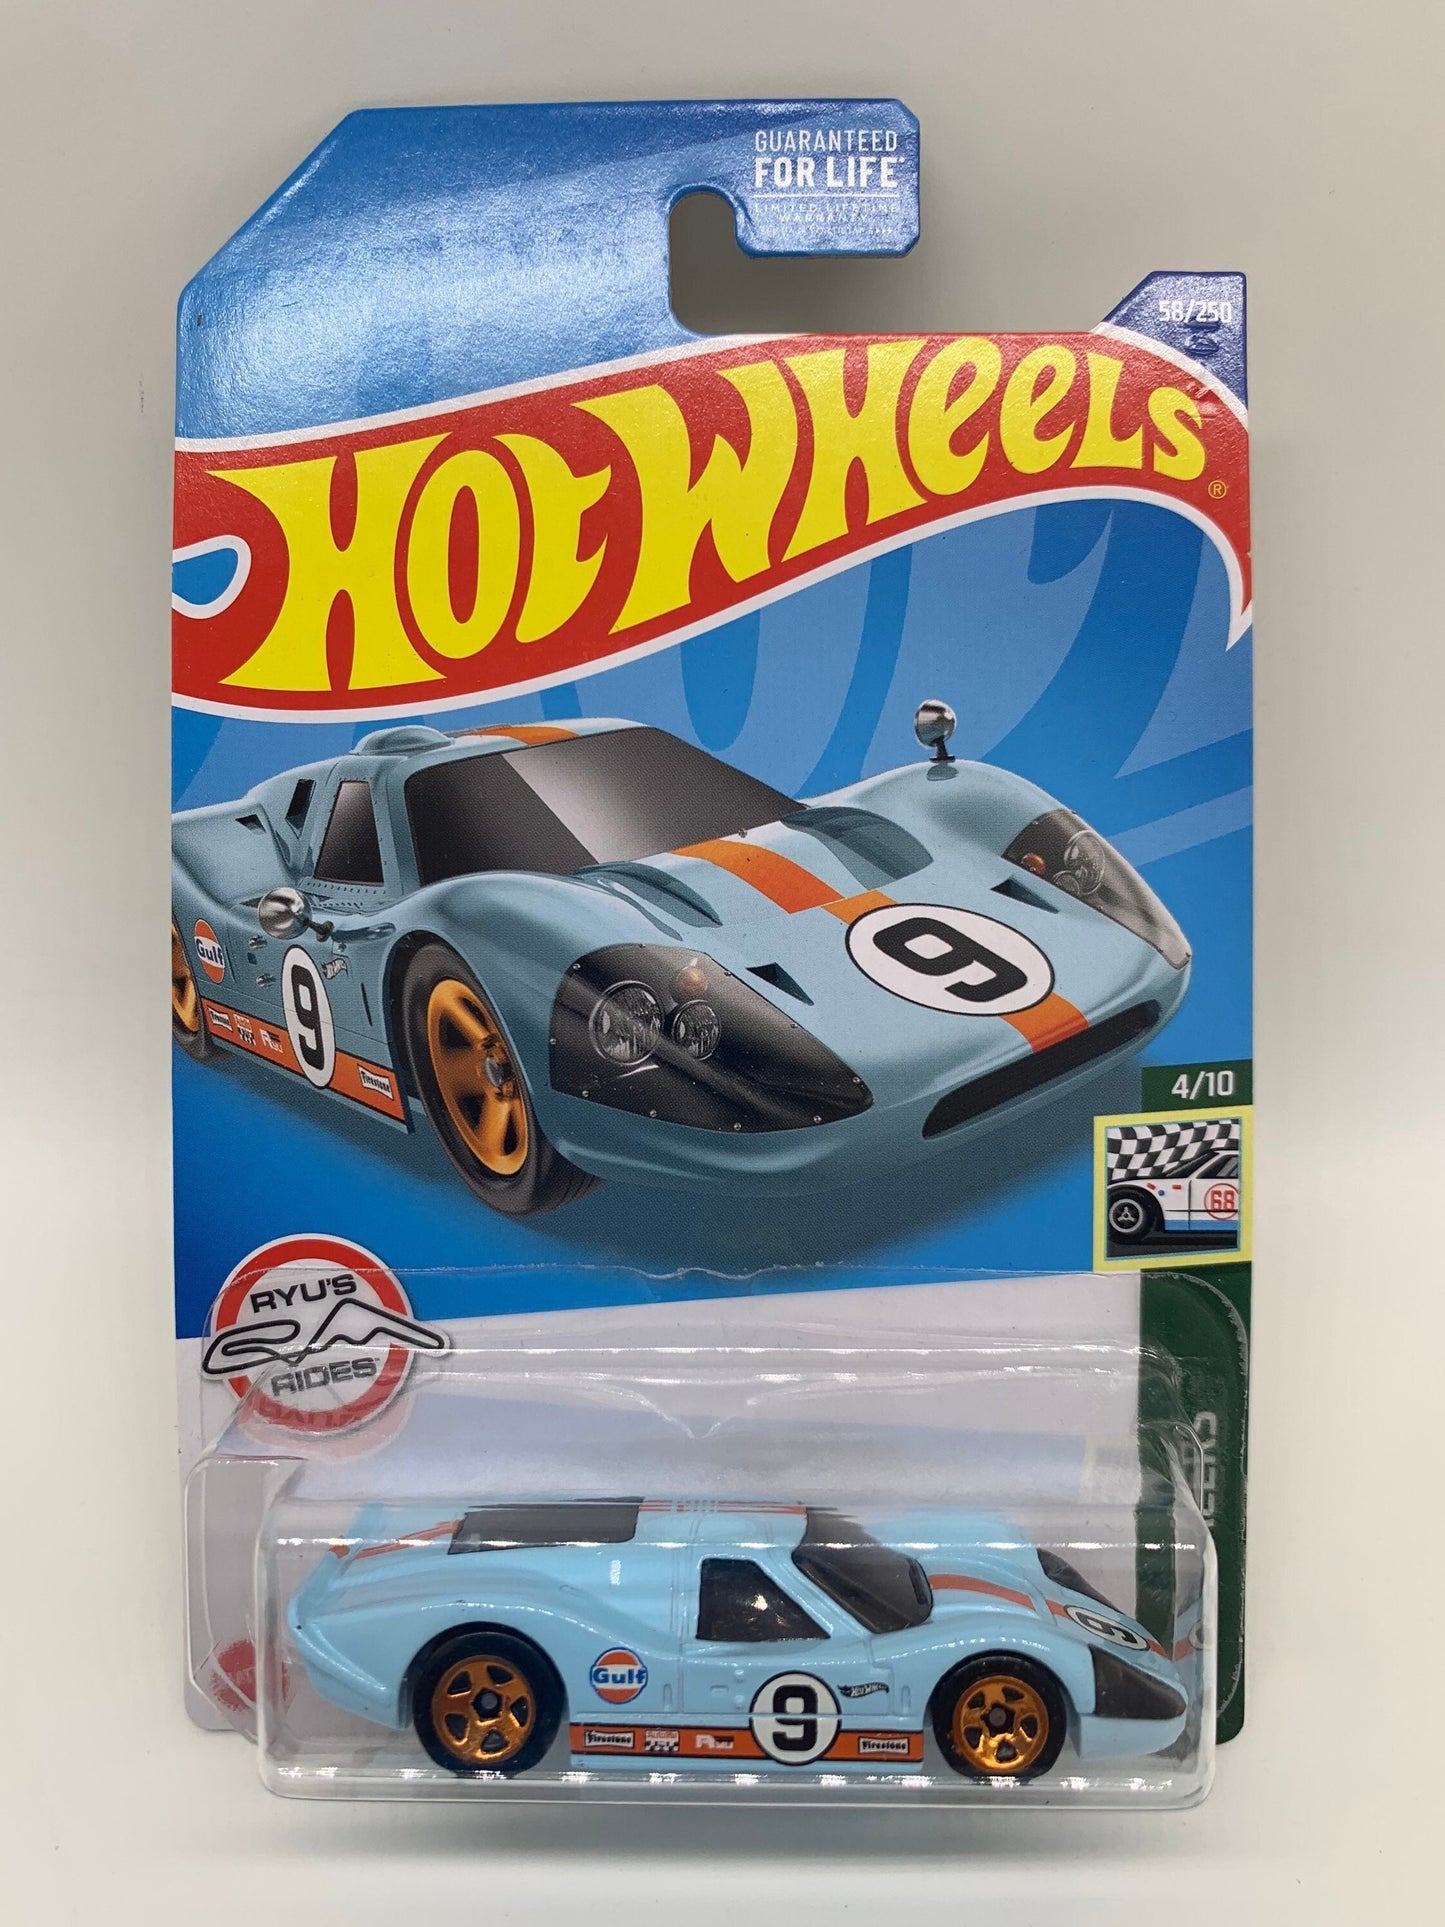 Hot Wheels '67 Ford GT40 Mk IV Gulf Light Blue Retro Racers Perfect Birthday Gift Miniature Collectable Scale Model Toy Car